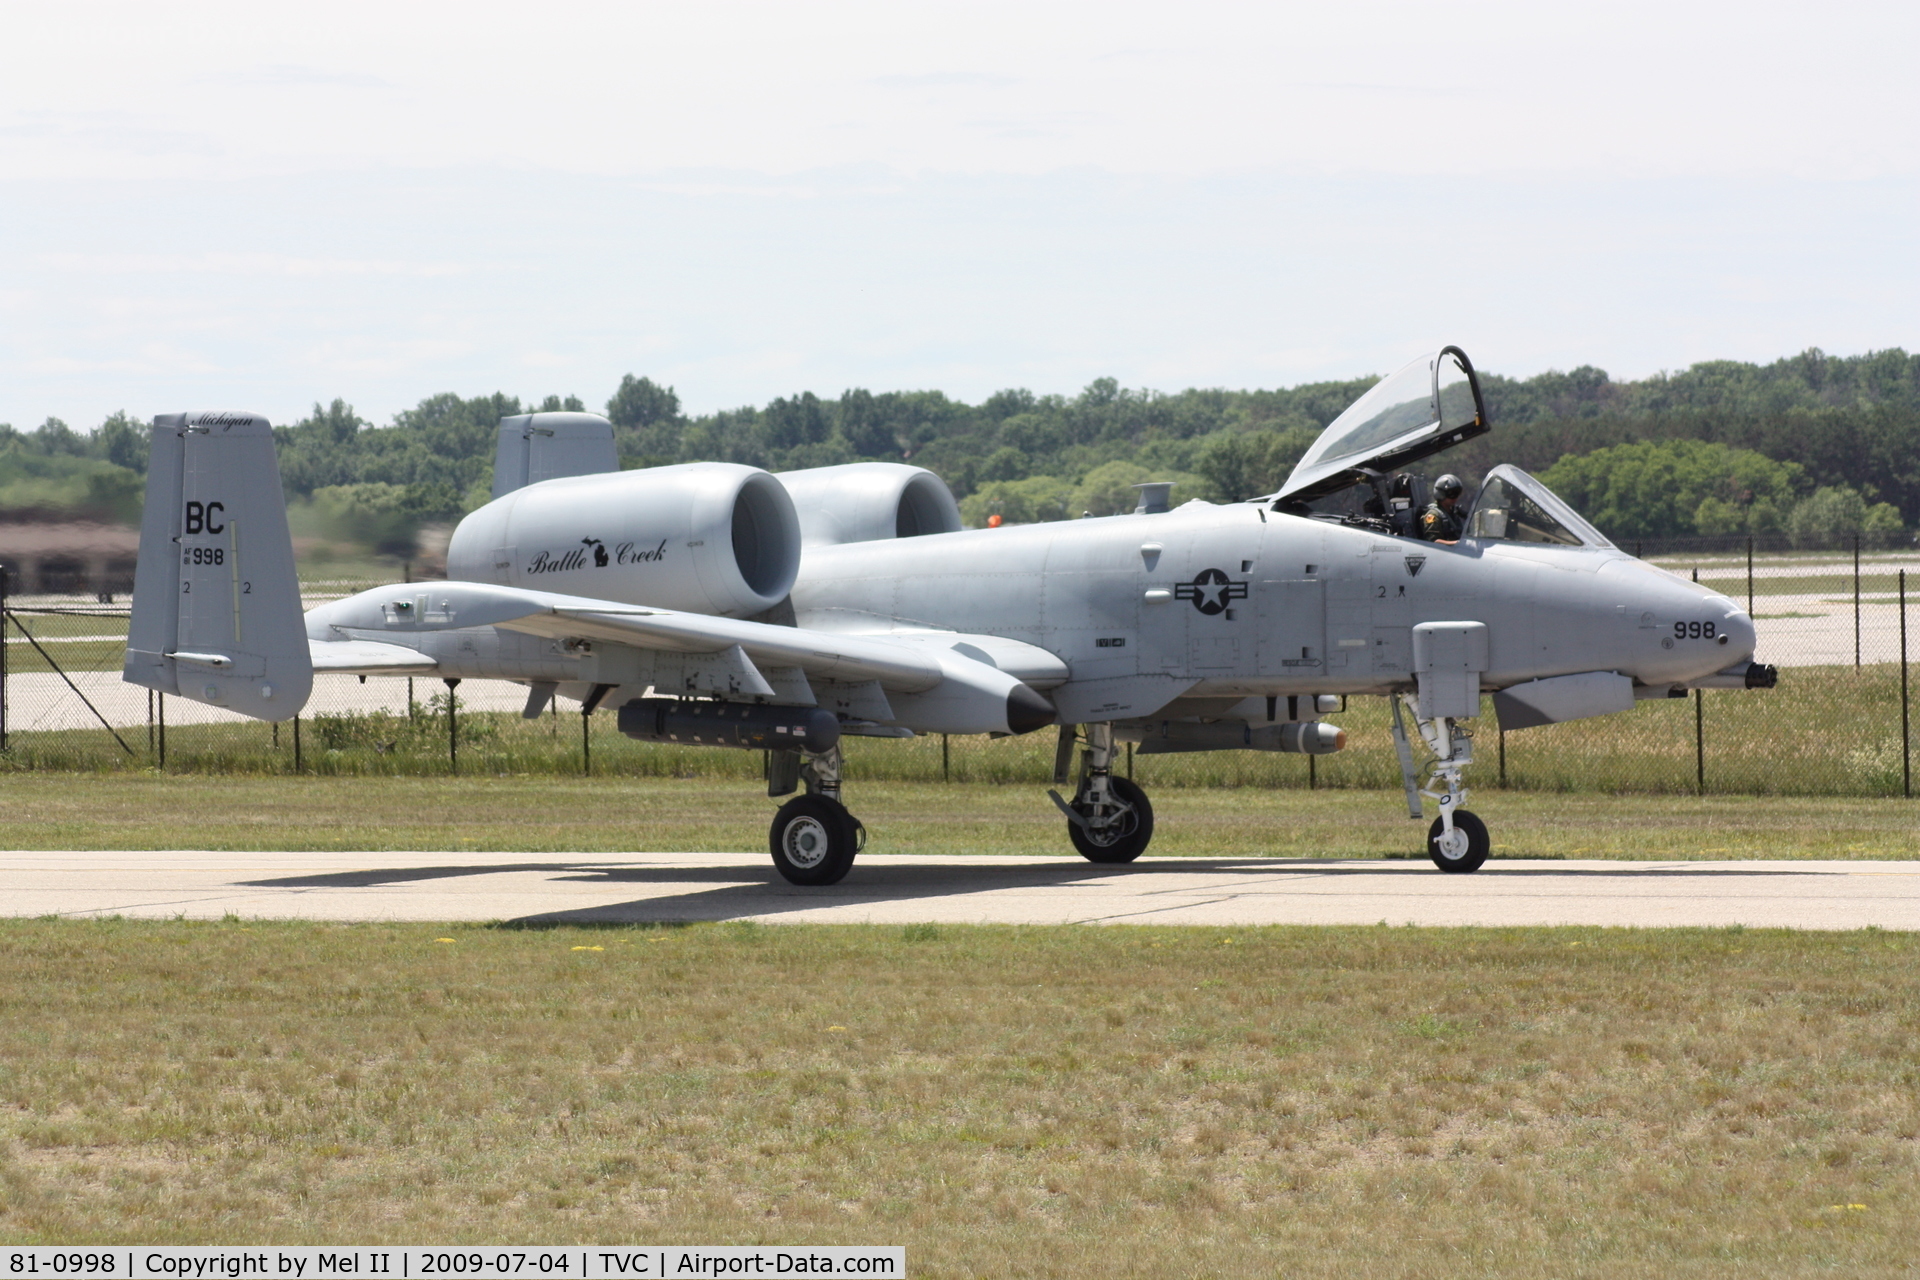 81-0998, 1980 Fairchild Republic A-10A Thunderbolt II C/N A10-0693, From The 110th Fighter Wing, Battle Creek ANGB, Taxi To USCG Hangar